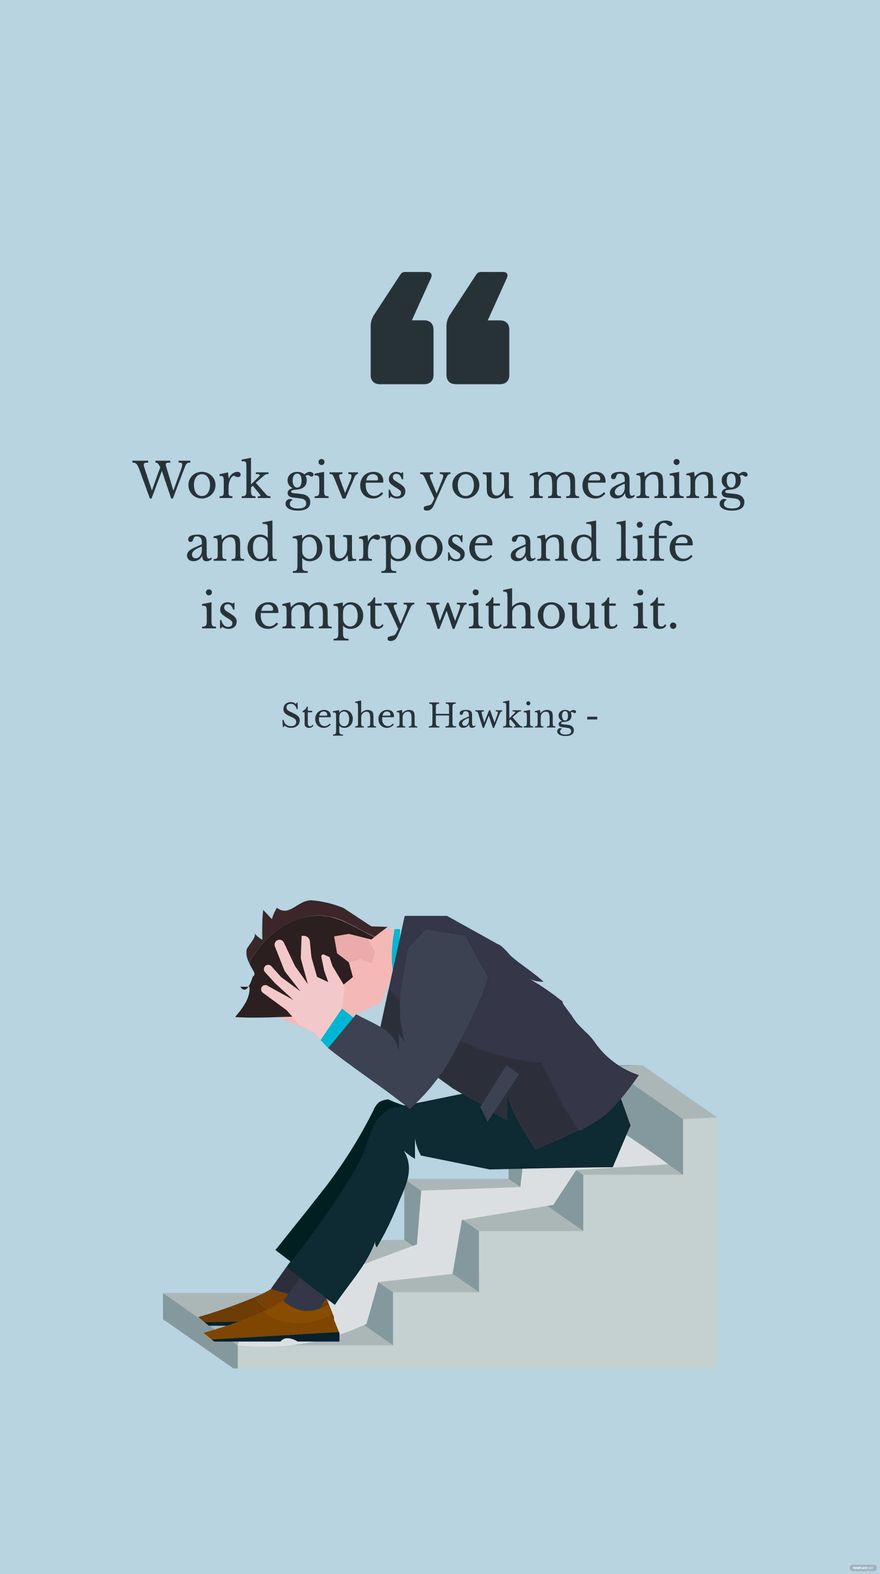 Free Stephen Hawking - Work gives you meaning and purpose and life is empty without it. in JPG